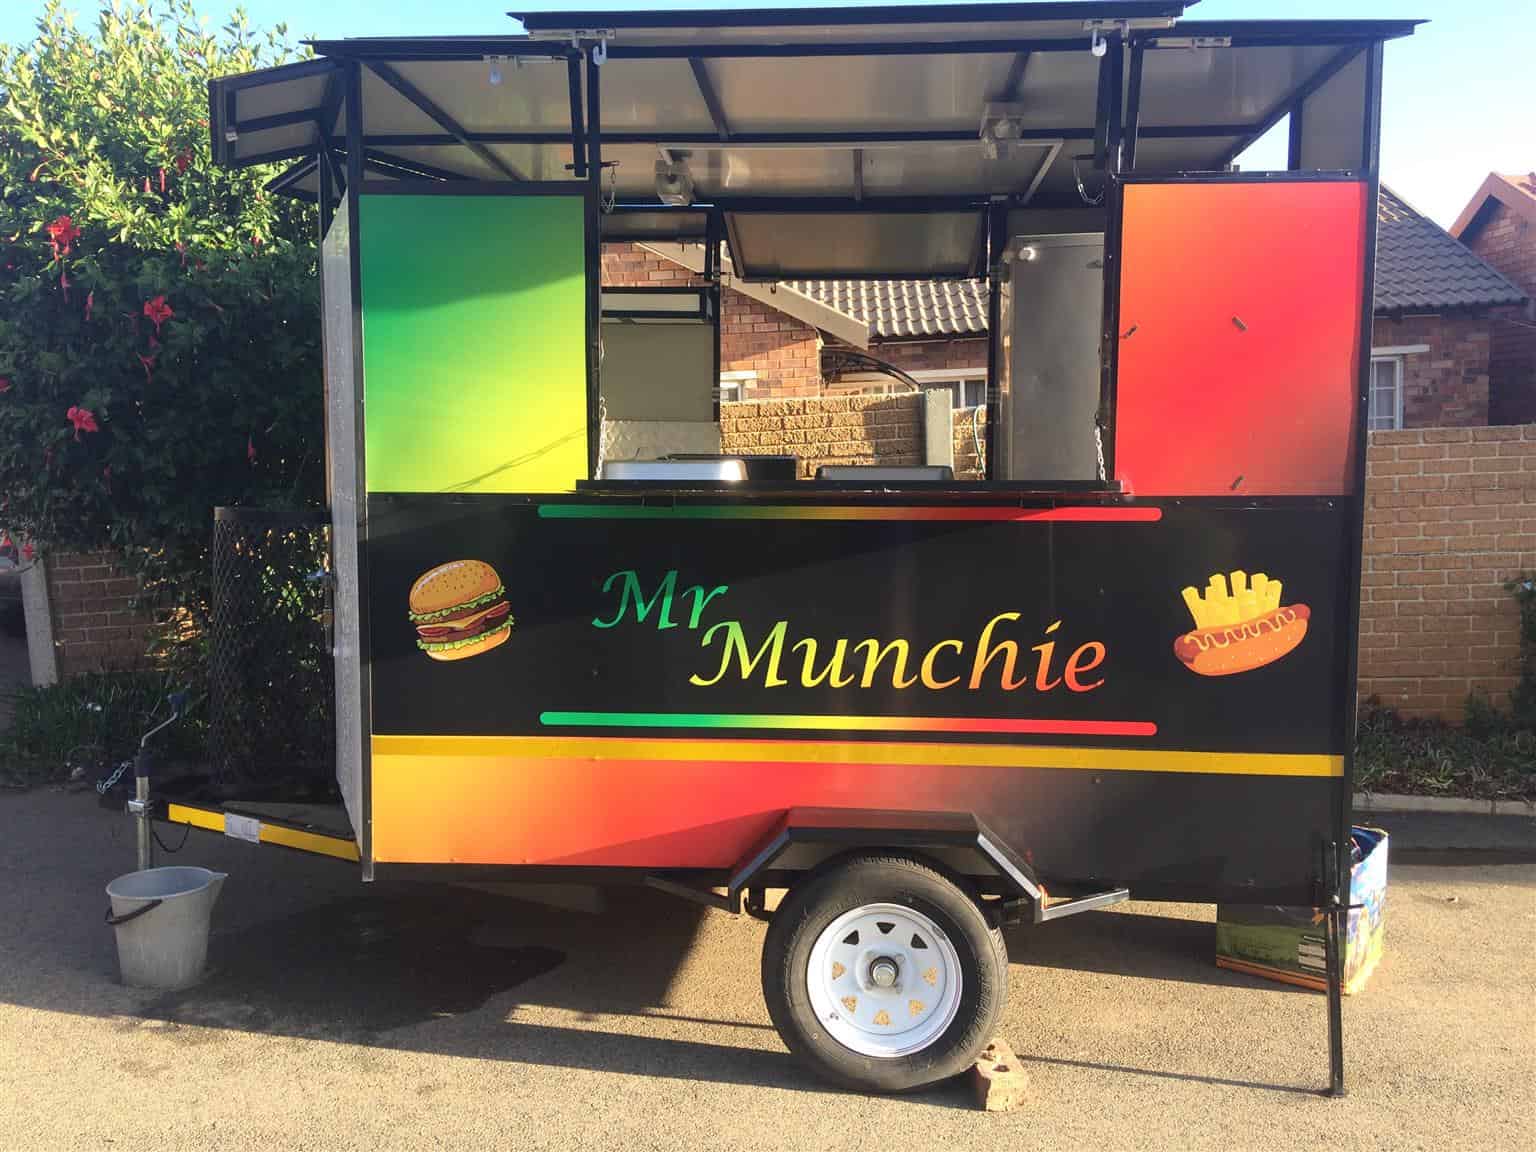 Truck Businesses That Don’t Sell Food (50 Ideas)